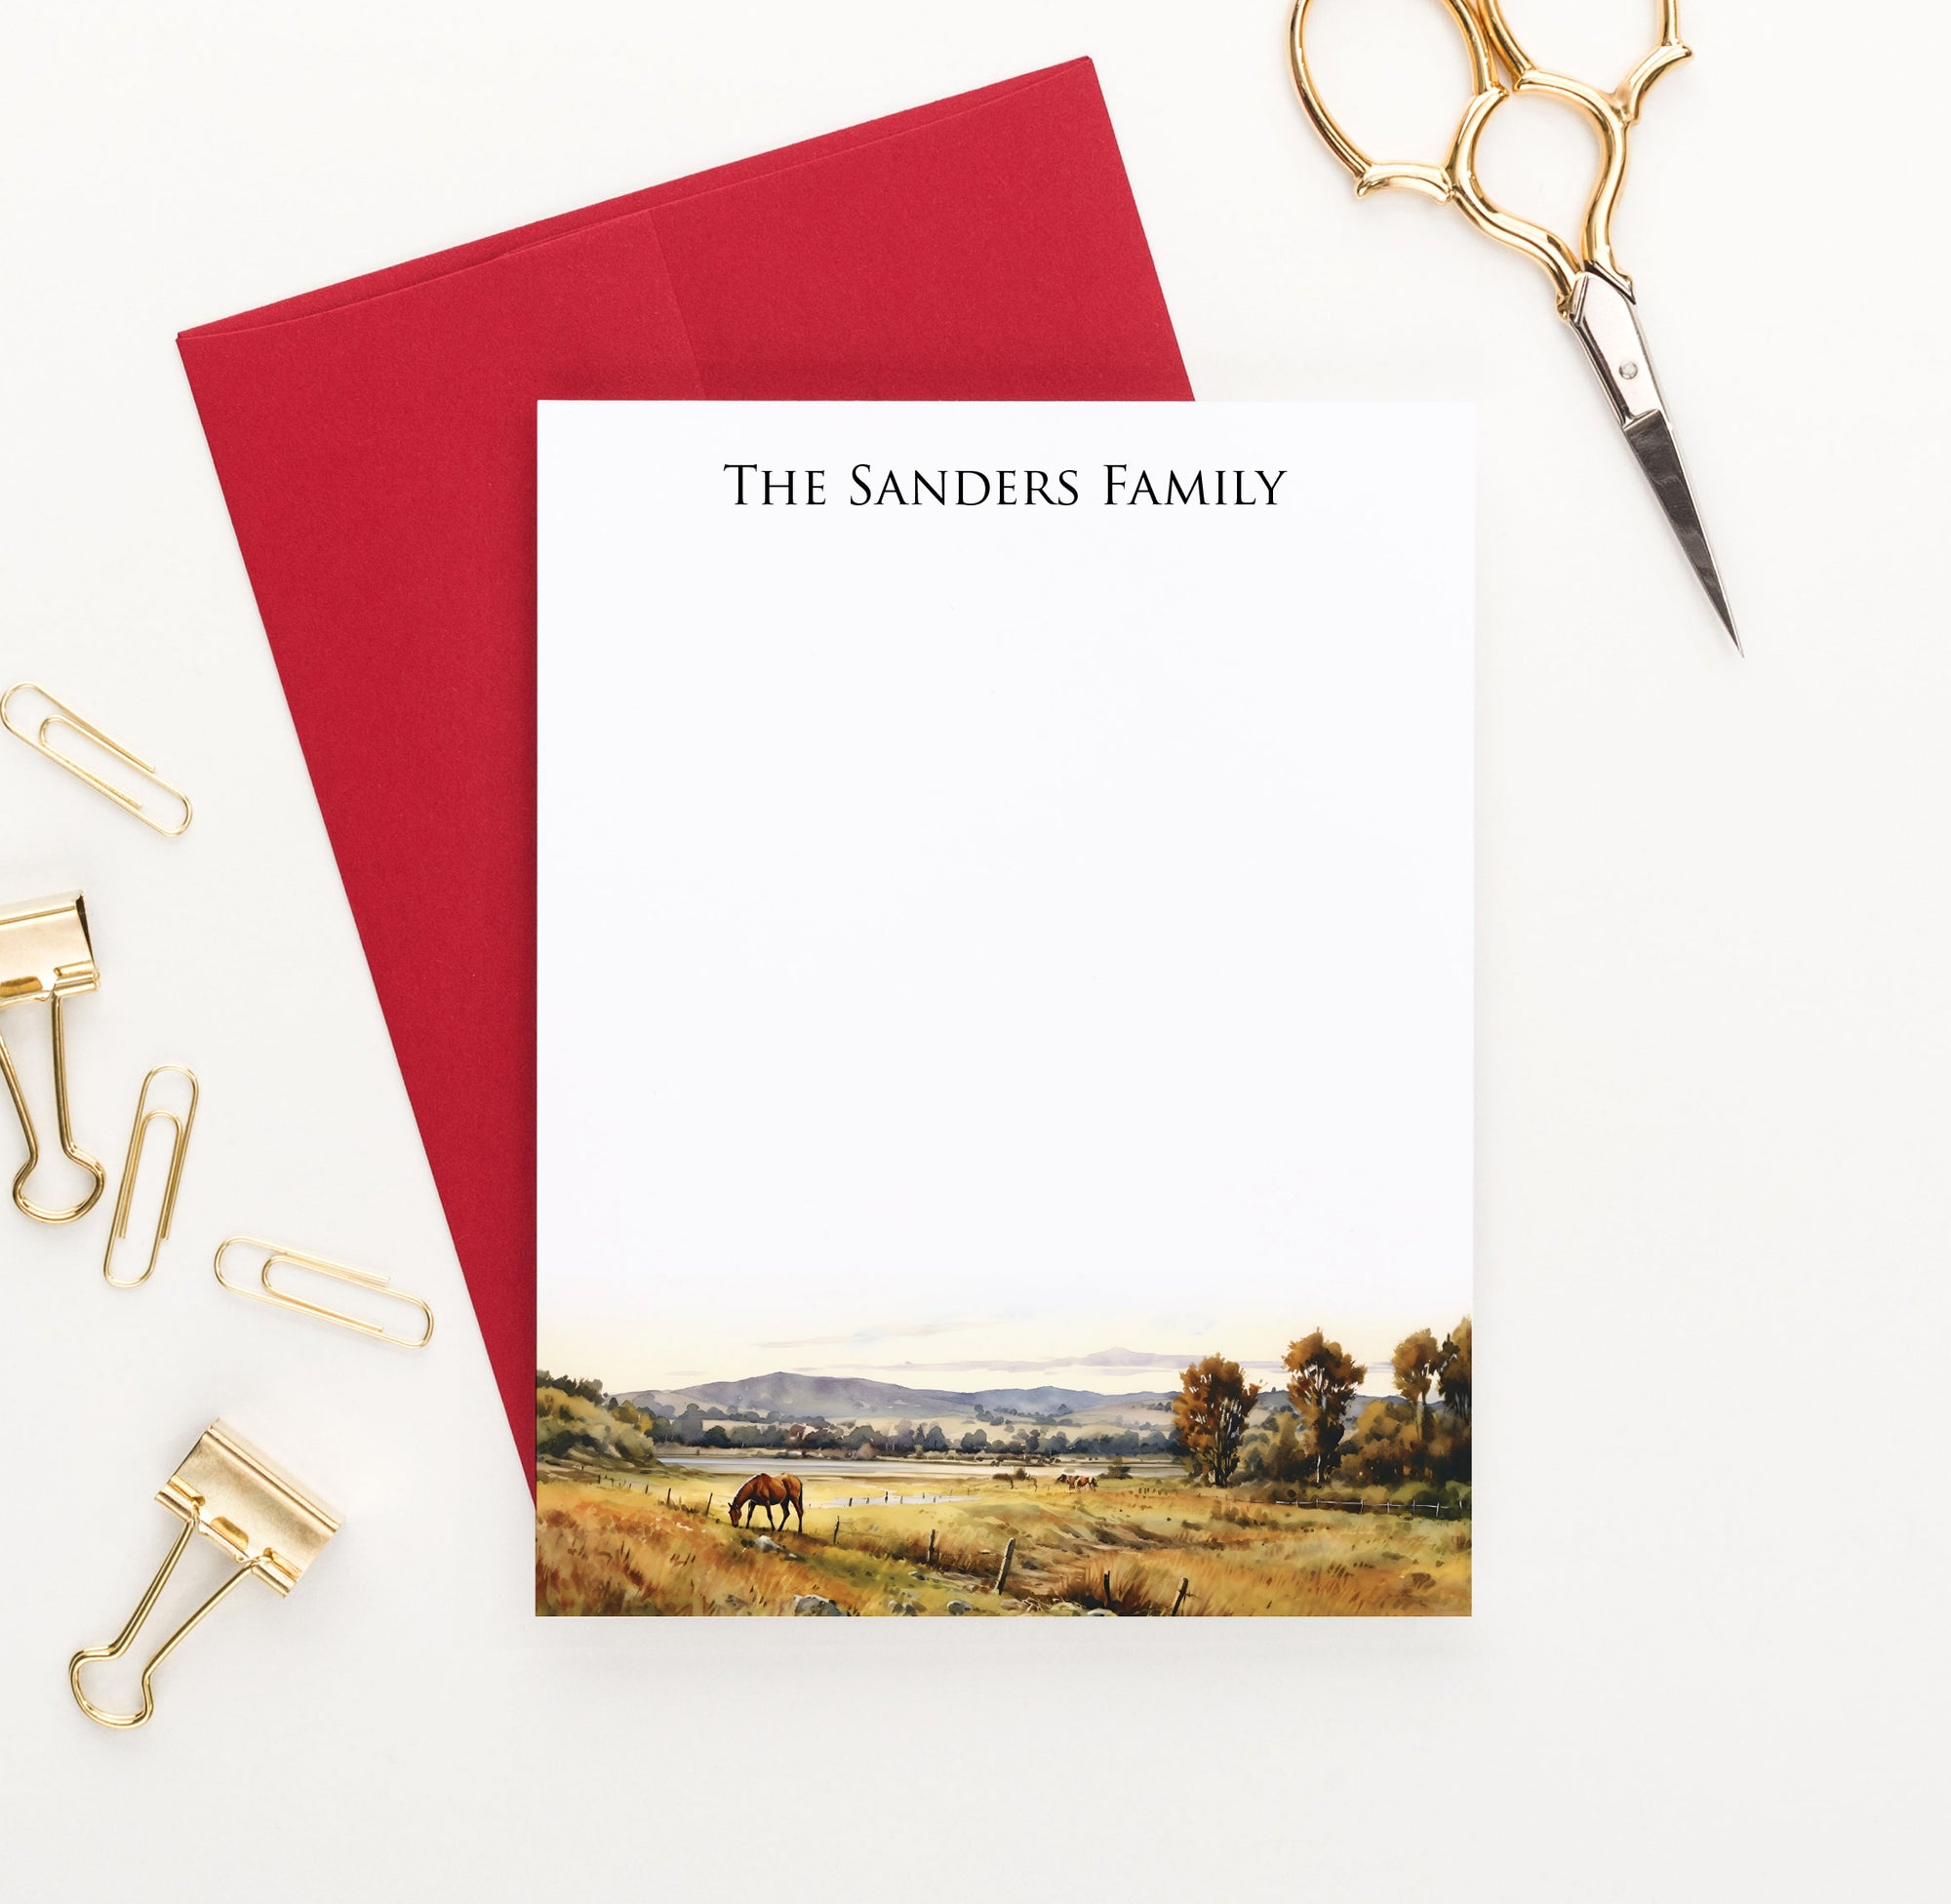 Pasture Landscape Personalized Family Stationery Note Cards With Horses